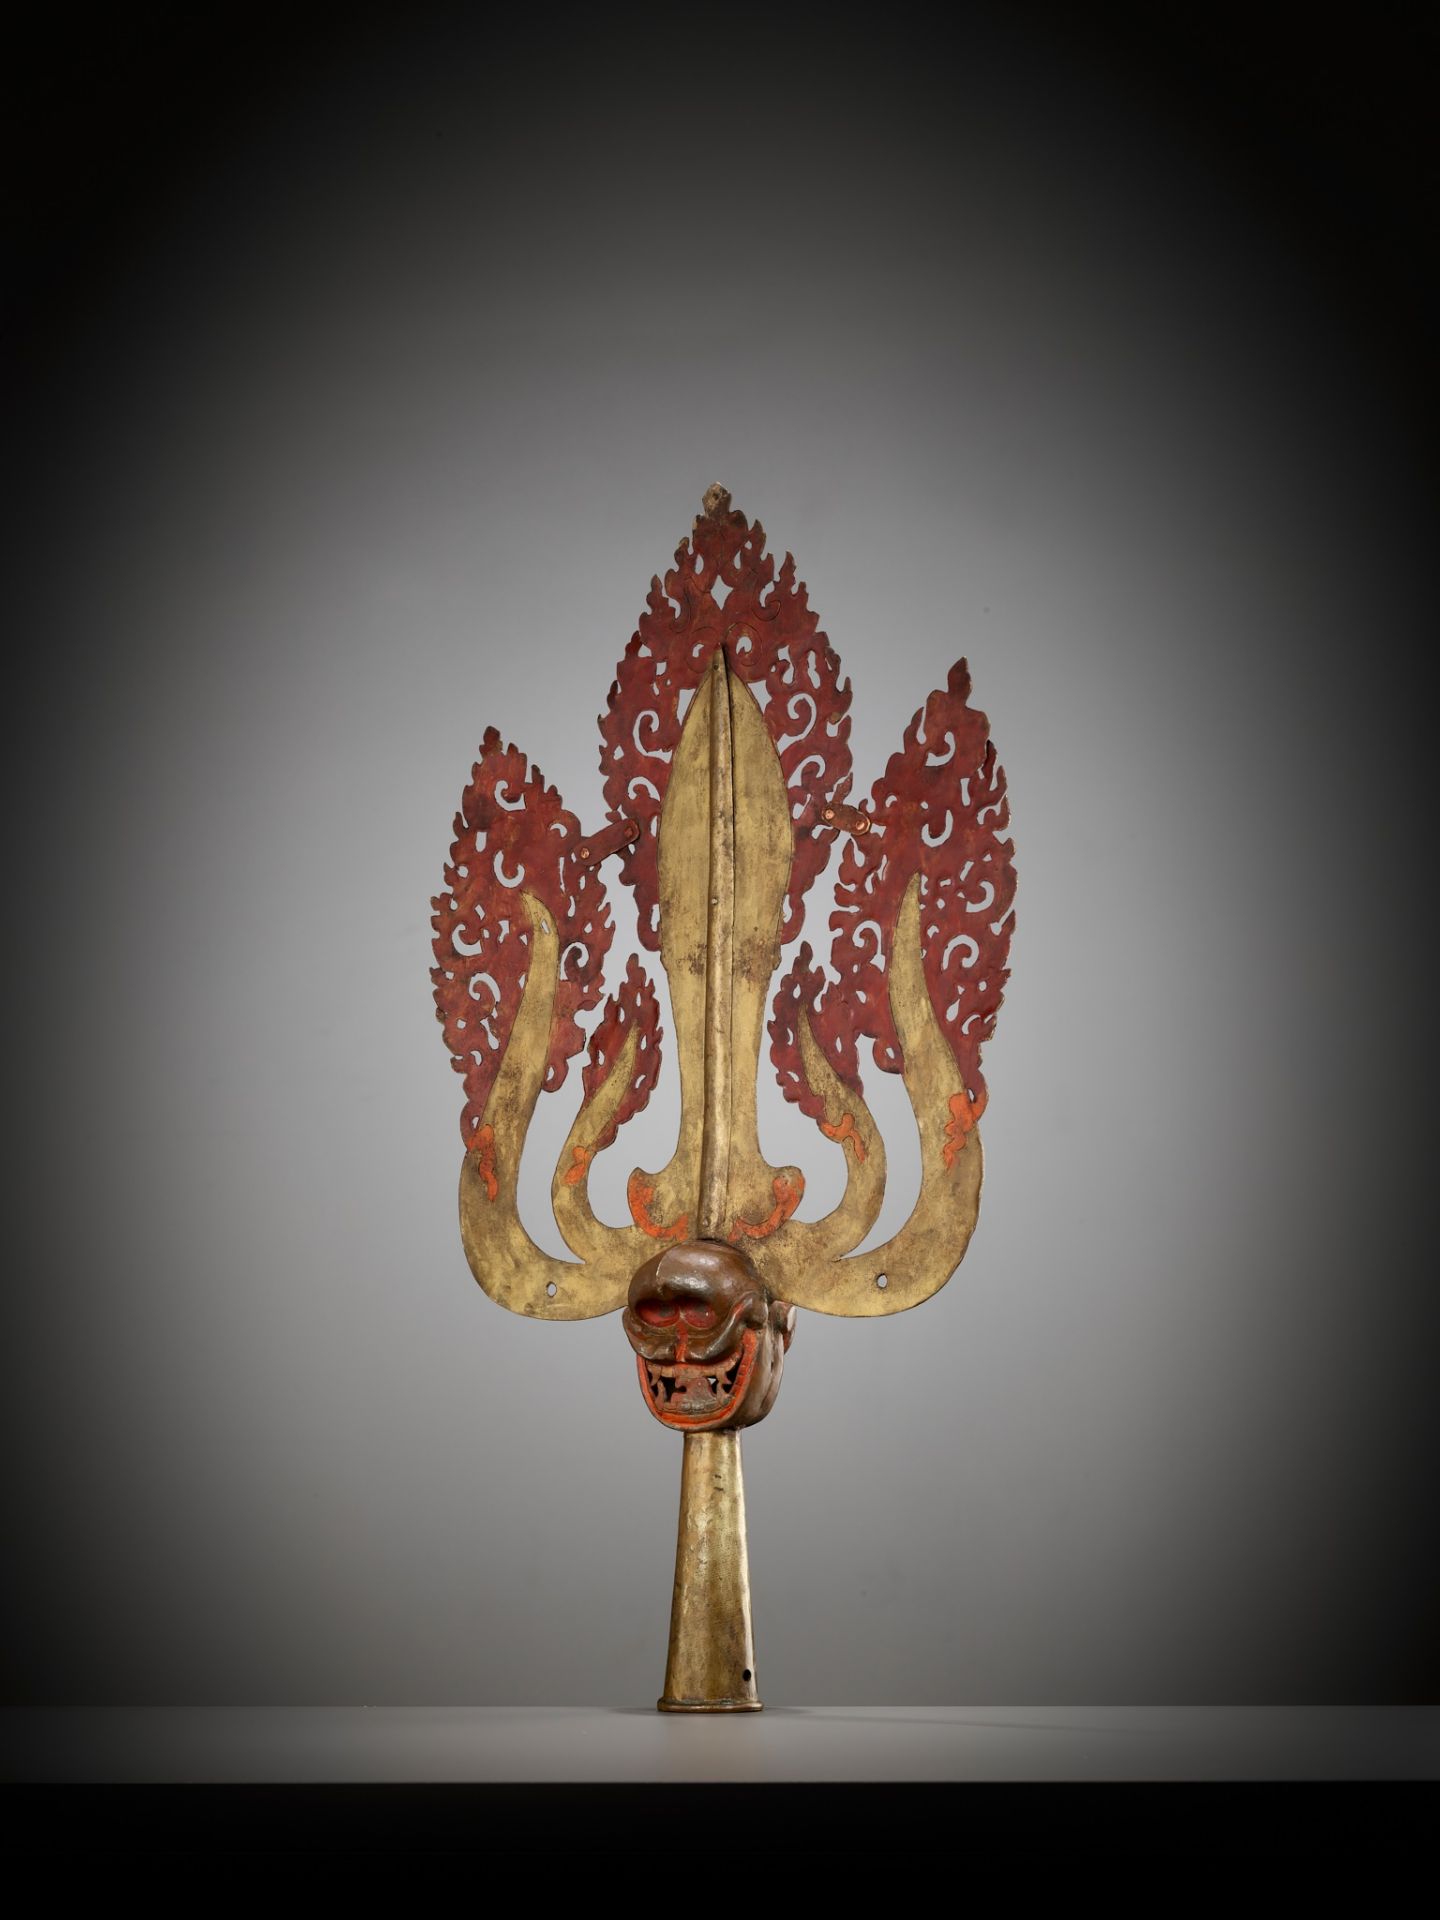 A LARGE LACQUERED AND GILT COPPER-ALLOY TRISHULA FITTING, TIBET, 17TH - 18TH CENTURY - Image 8 of 12